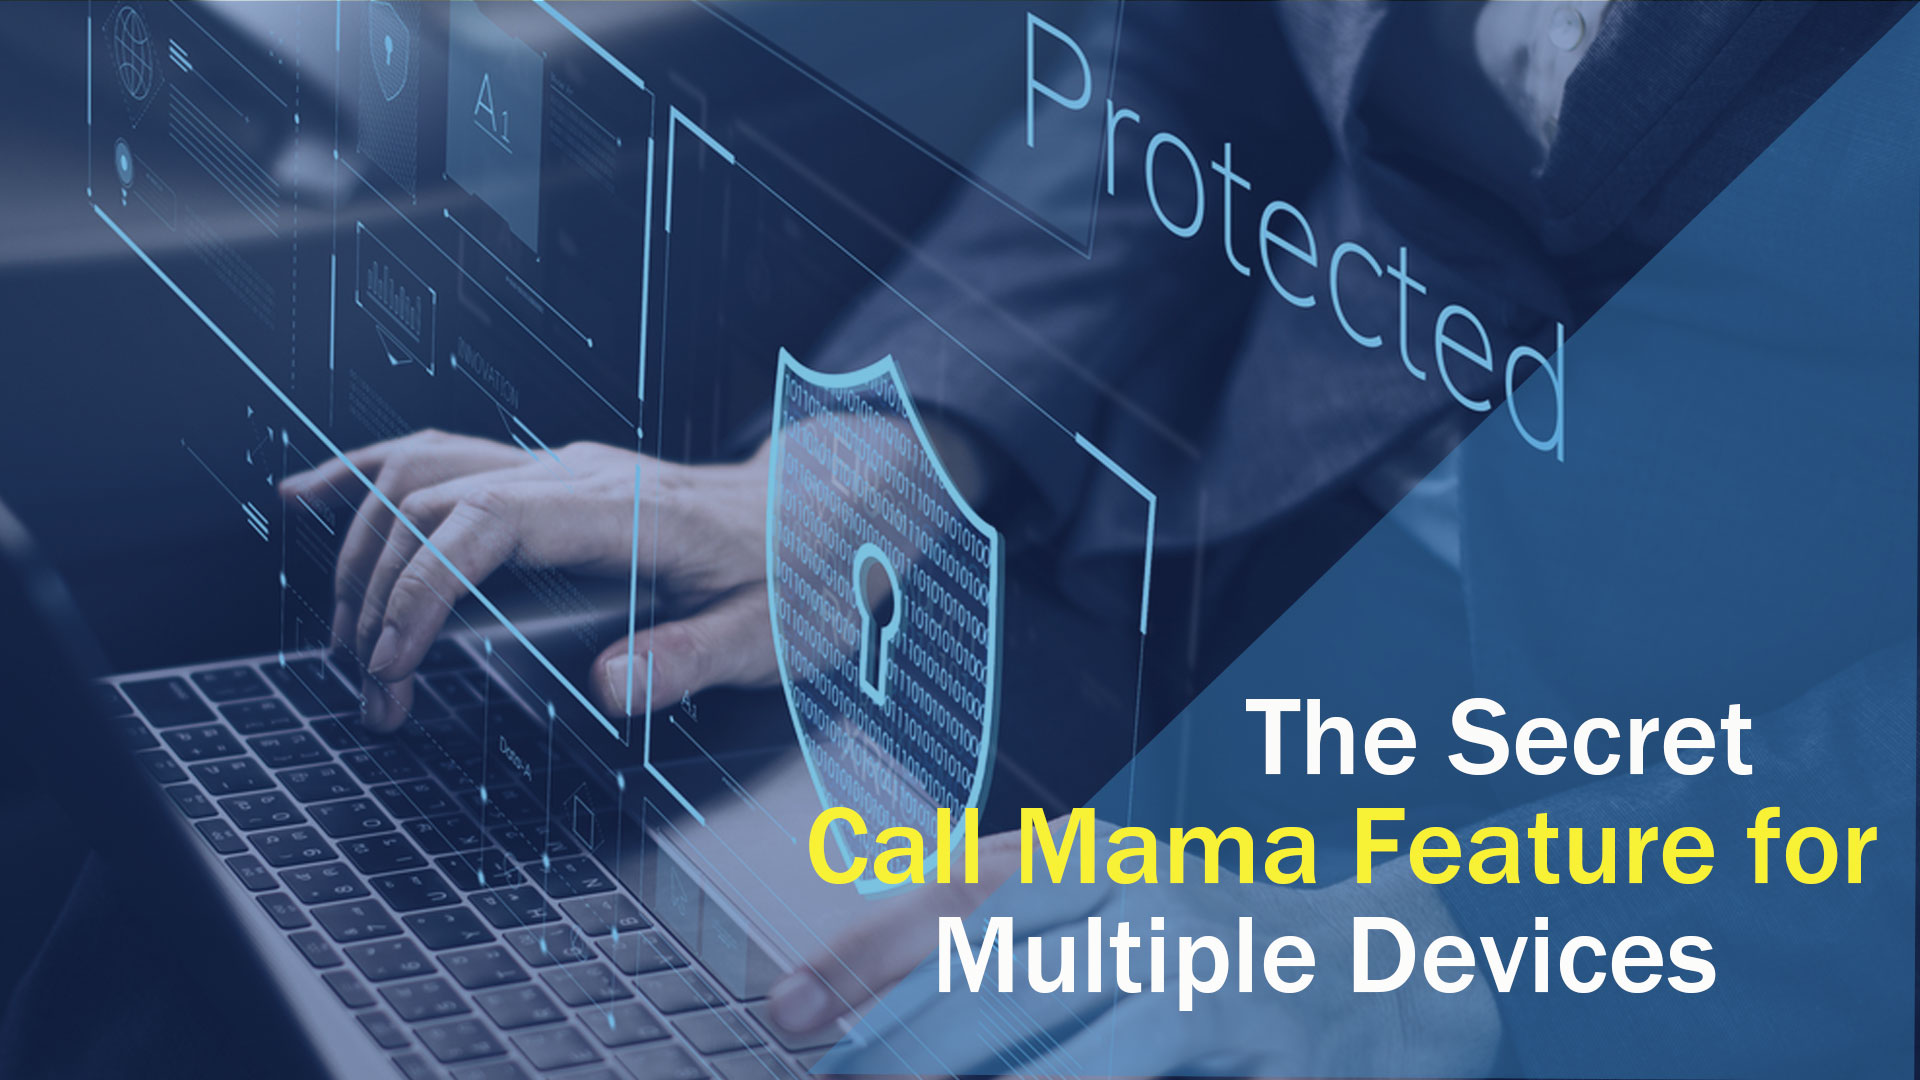 The Secret Call Mama Feature for Multiple Devices